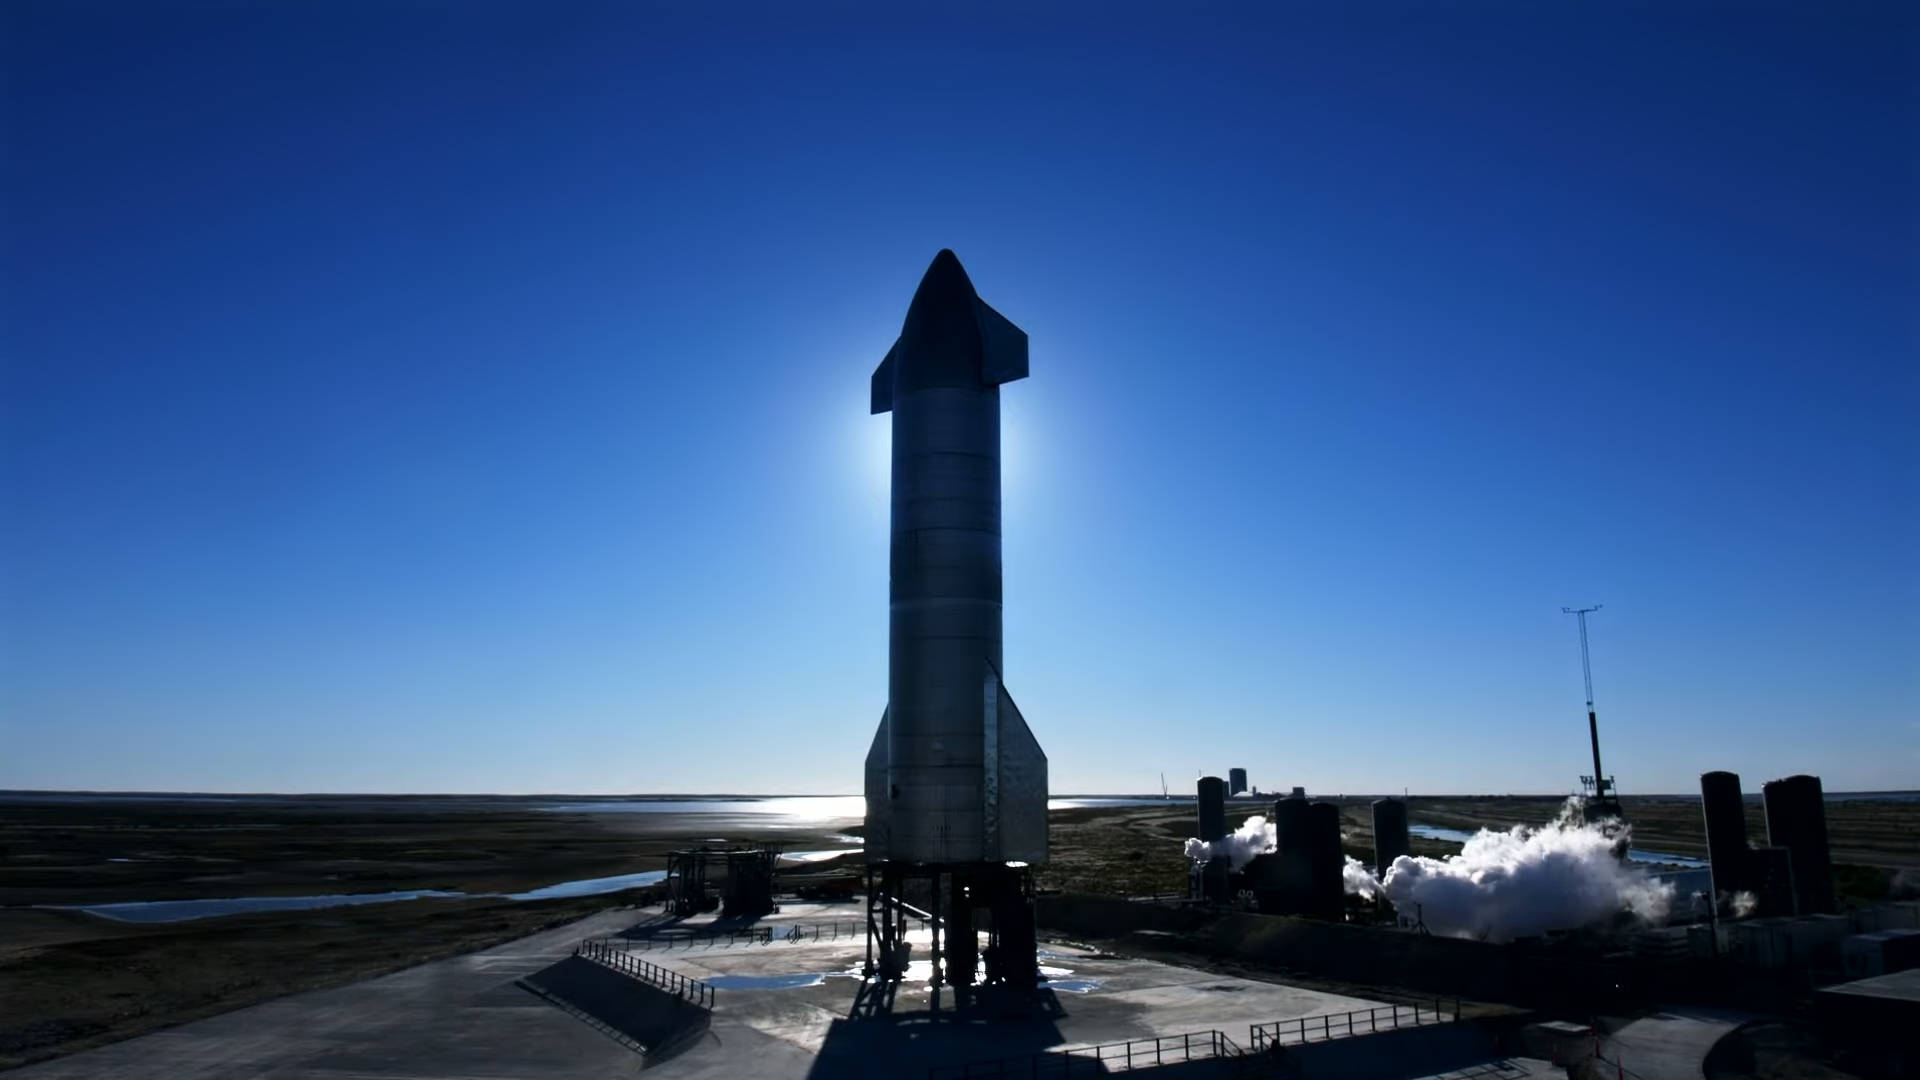 Spacex Starship: Inspiring the Next Generation of Exploration Wallpaper